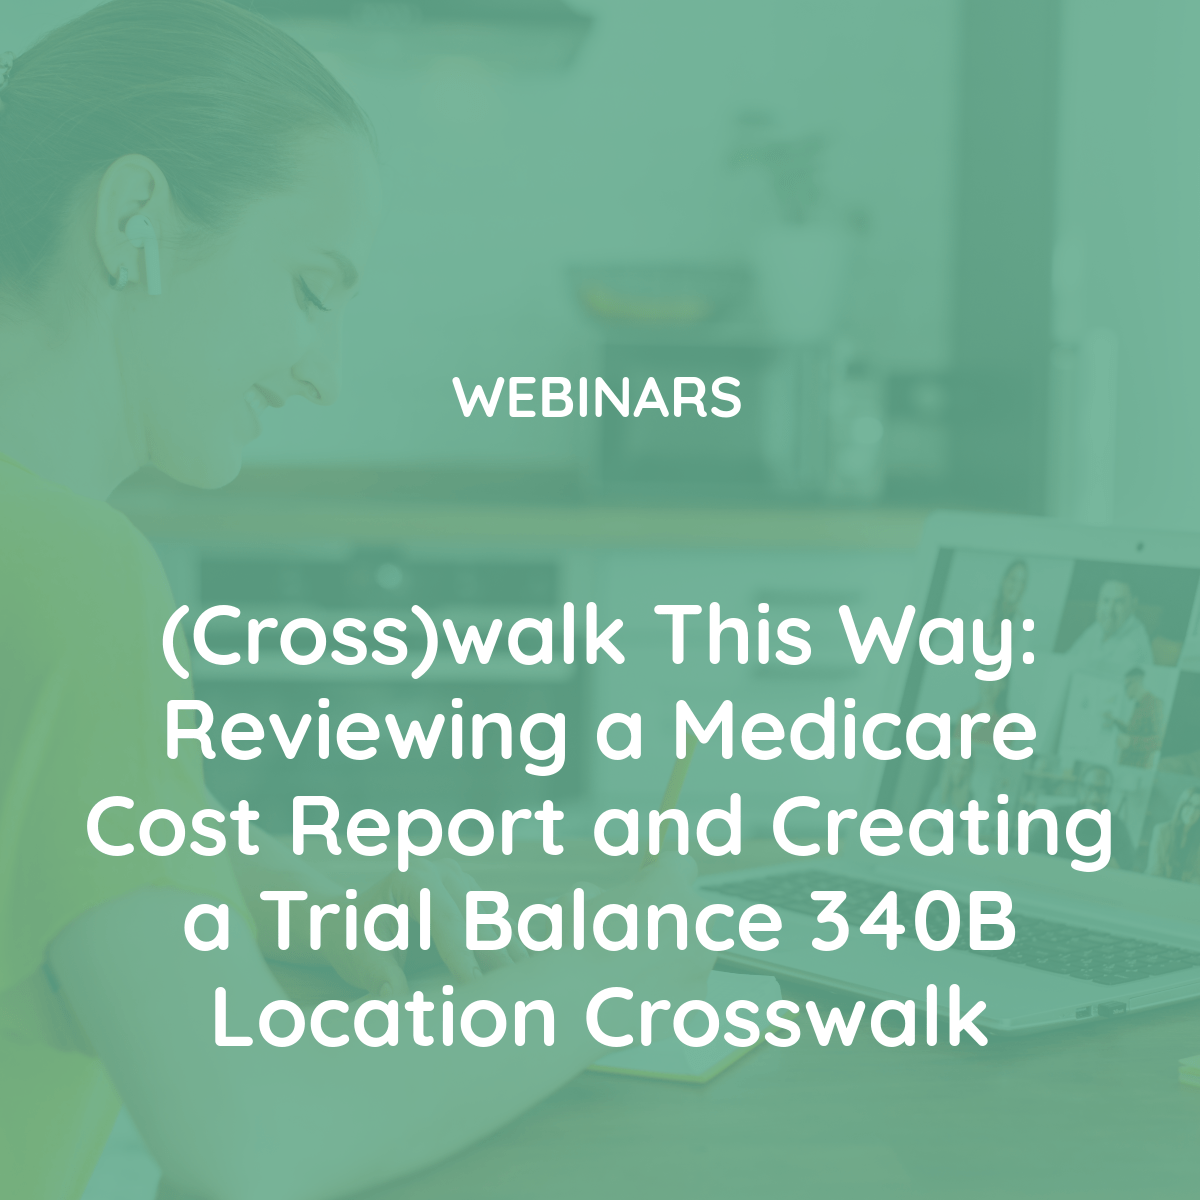 (Cross)walk This Way: Creating a Medicare Cost Report, Trial Balance and 340B Location Crosswalk